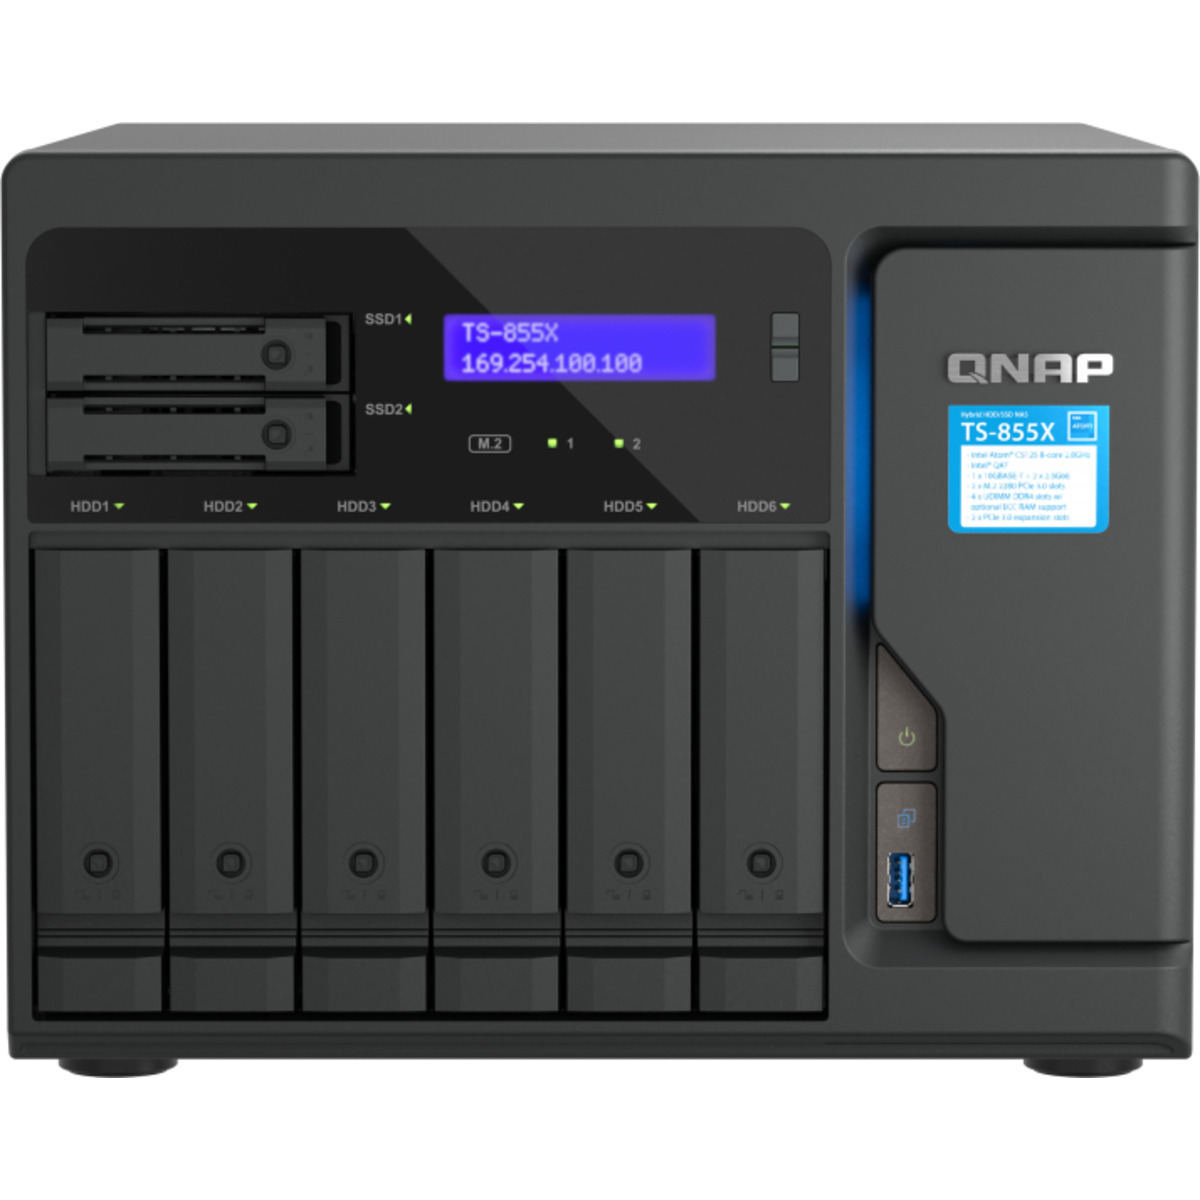 buy QNAP TS-855X 24tb Desktop NAS - Network Attached Storage Device 6x4000gb Toshiba MN Series MN08ADA400E 3.5 7200rpm SATA 6Gb/s HDD NAS Class Drives Installed - Burn-In Tested - ON SALE - FREE RAM UPGRADE - nas headquarters buy network attached storage server device das new raid-5 free shipping simply usa christmas holiday black friday cyber monday week sale happening now! TS-855X